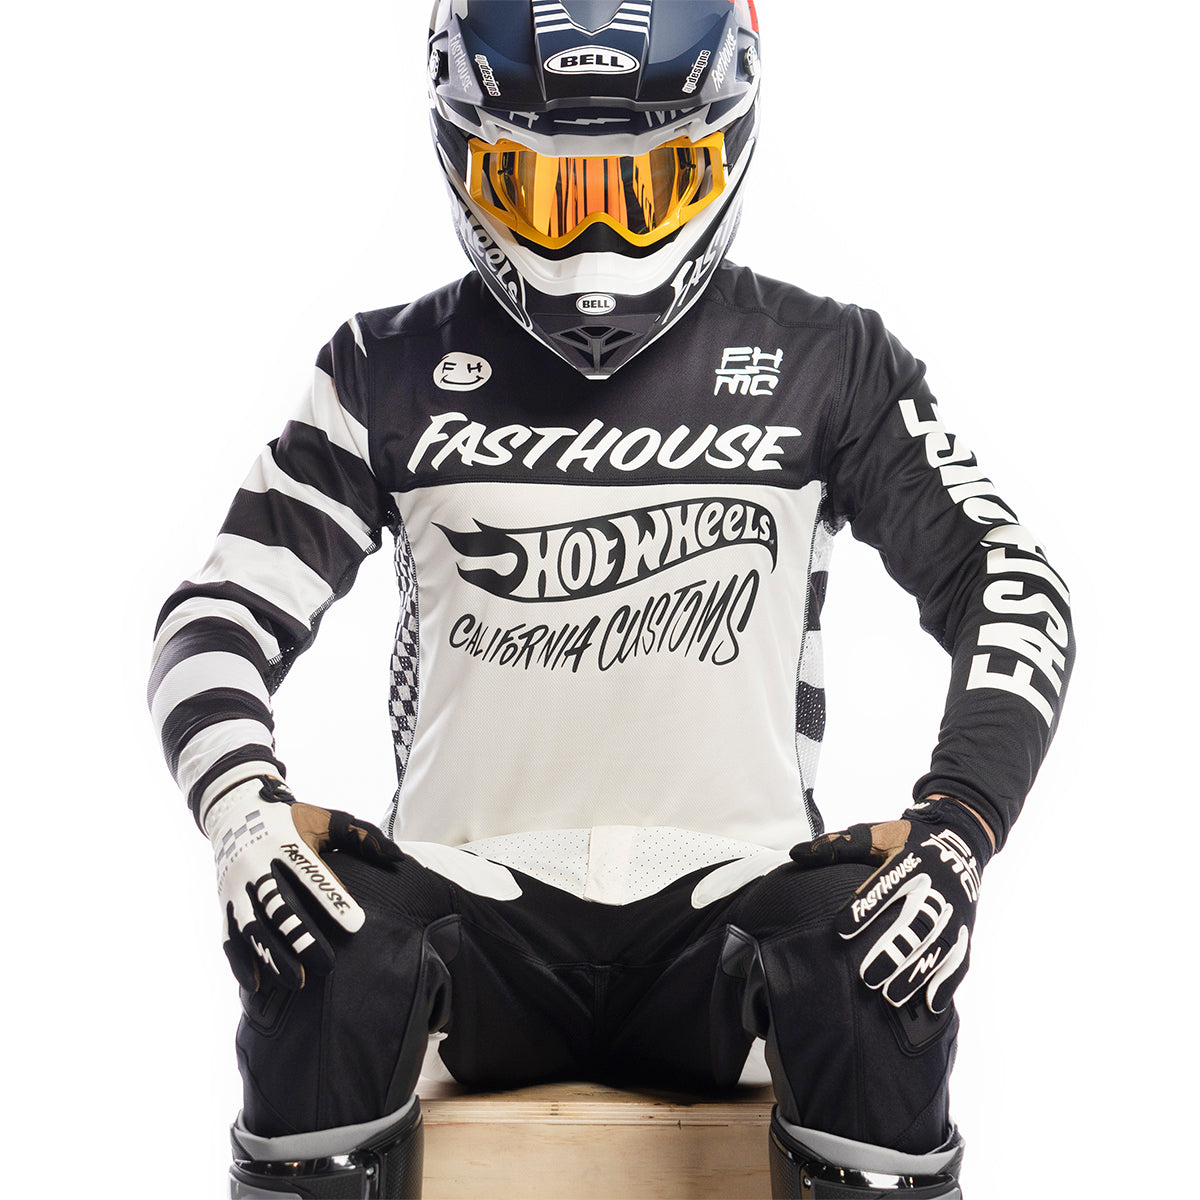 Grindhouse Hot Wheels Jersey - White/Black